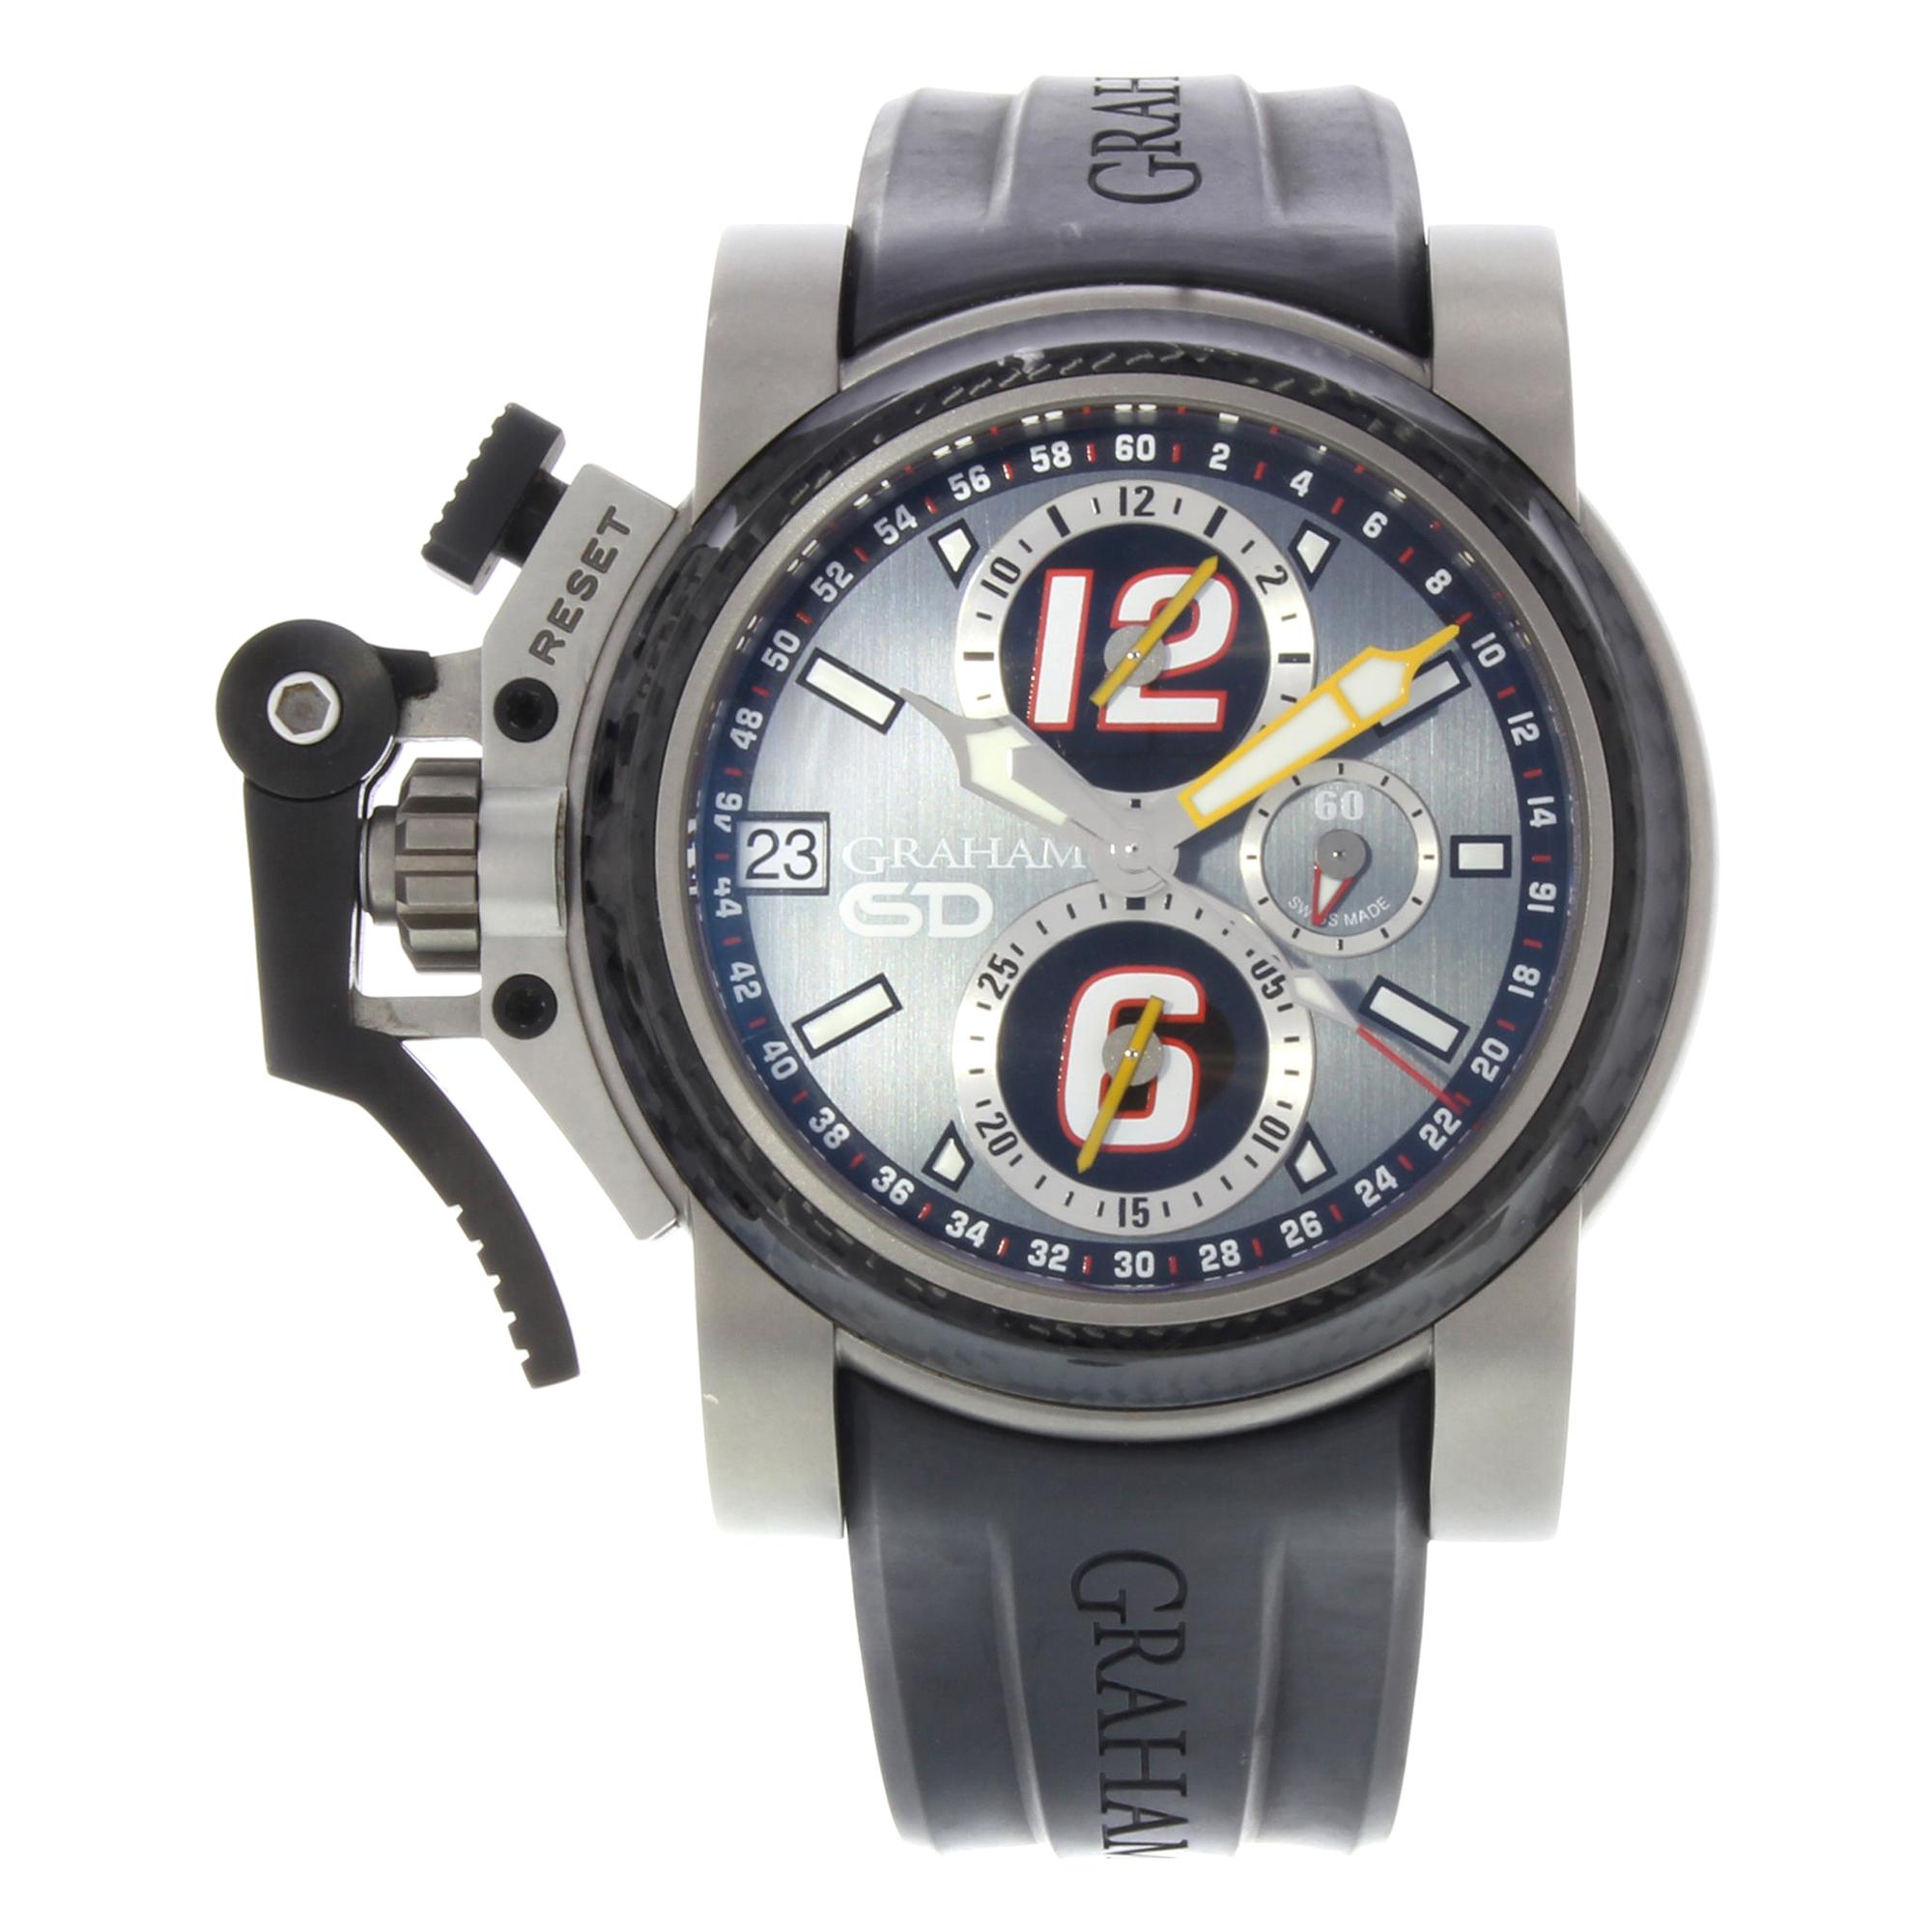 Graham Chronofighter Oversize Limited Edition 2OVKI.B30A.K10T Automatic Watch